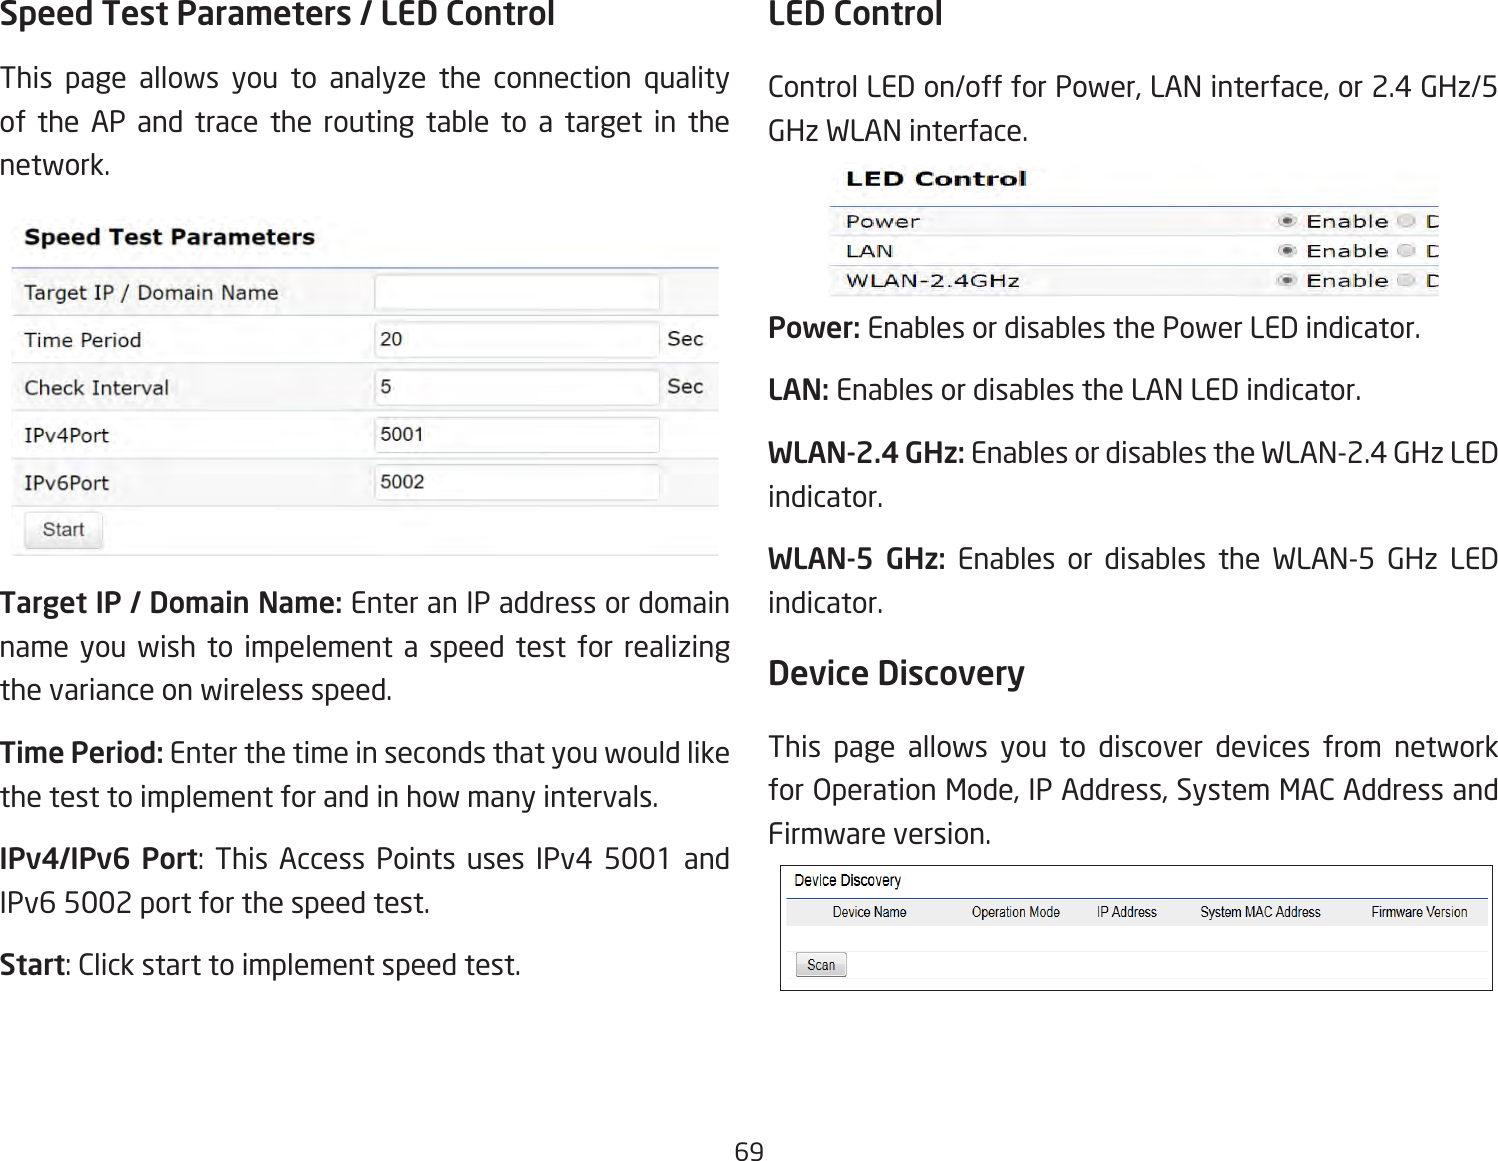 69Speed Test Parameters / LED Control This page allows you to analyze the connection quality of the AP and trace the routing table to a target in the network.Target IP / Domain Name: Enter an IP address or domain name you wish to impelement a speed test for realizing the variance on wireless speed.Time Period: Enter the time in seconds that you would like the test to implement for and in how many intervals. IPv4/IPv6 Port:  This  Access  Points  uses  IPv4  5001  and IPv6 5002 port for the speed test.Start: Click start to implement speed test.LED ControlControl LED on/off for Power, LAN interface, or 2.4 GHz/5 GHz WLAN interface.Power: Enables or disables the Power LED indicator.LAN: Enables or disables the LAN LED indicator.WLAN-2.4 GHz: Enables or disables the WLAN-2.4 GHz LED indicator.WLAN-5 GHz: Enables or disables the WLAN-5 GHz LED indicator. Device Discovery This page allows you to discover devices from network for Operation Mode, IP Address, System MAC Address and Firmware version.